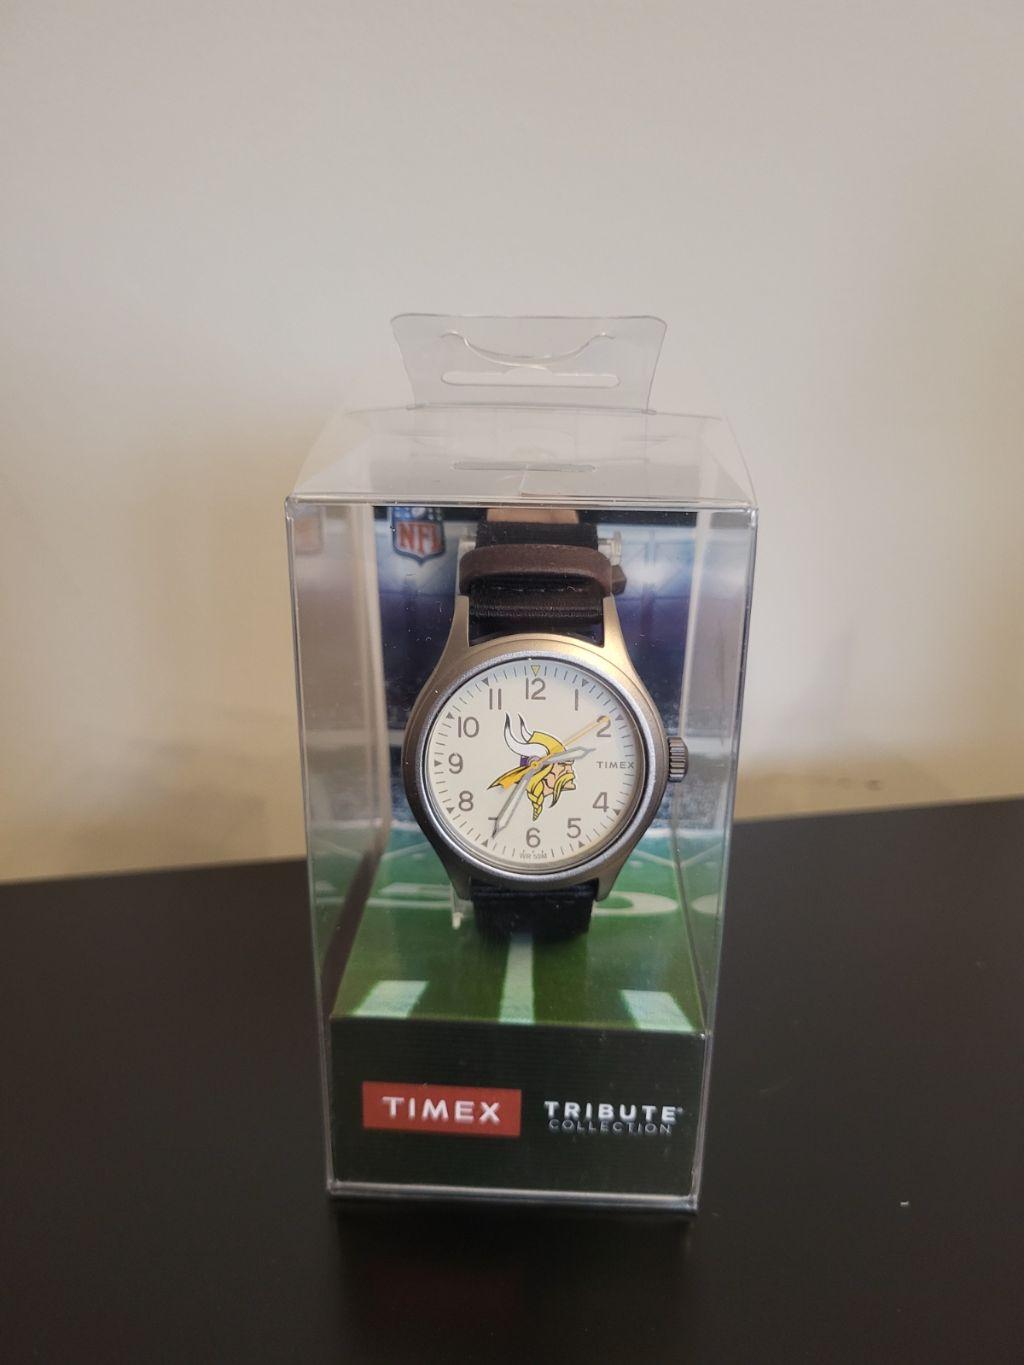 MN Vikings Watch - Timex Tribute Collection (Black Band)